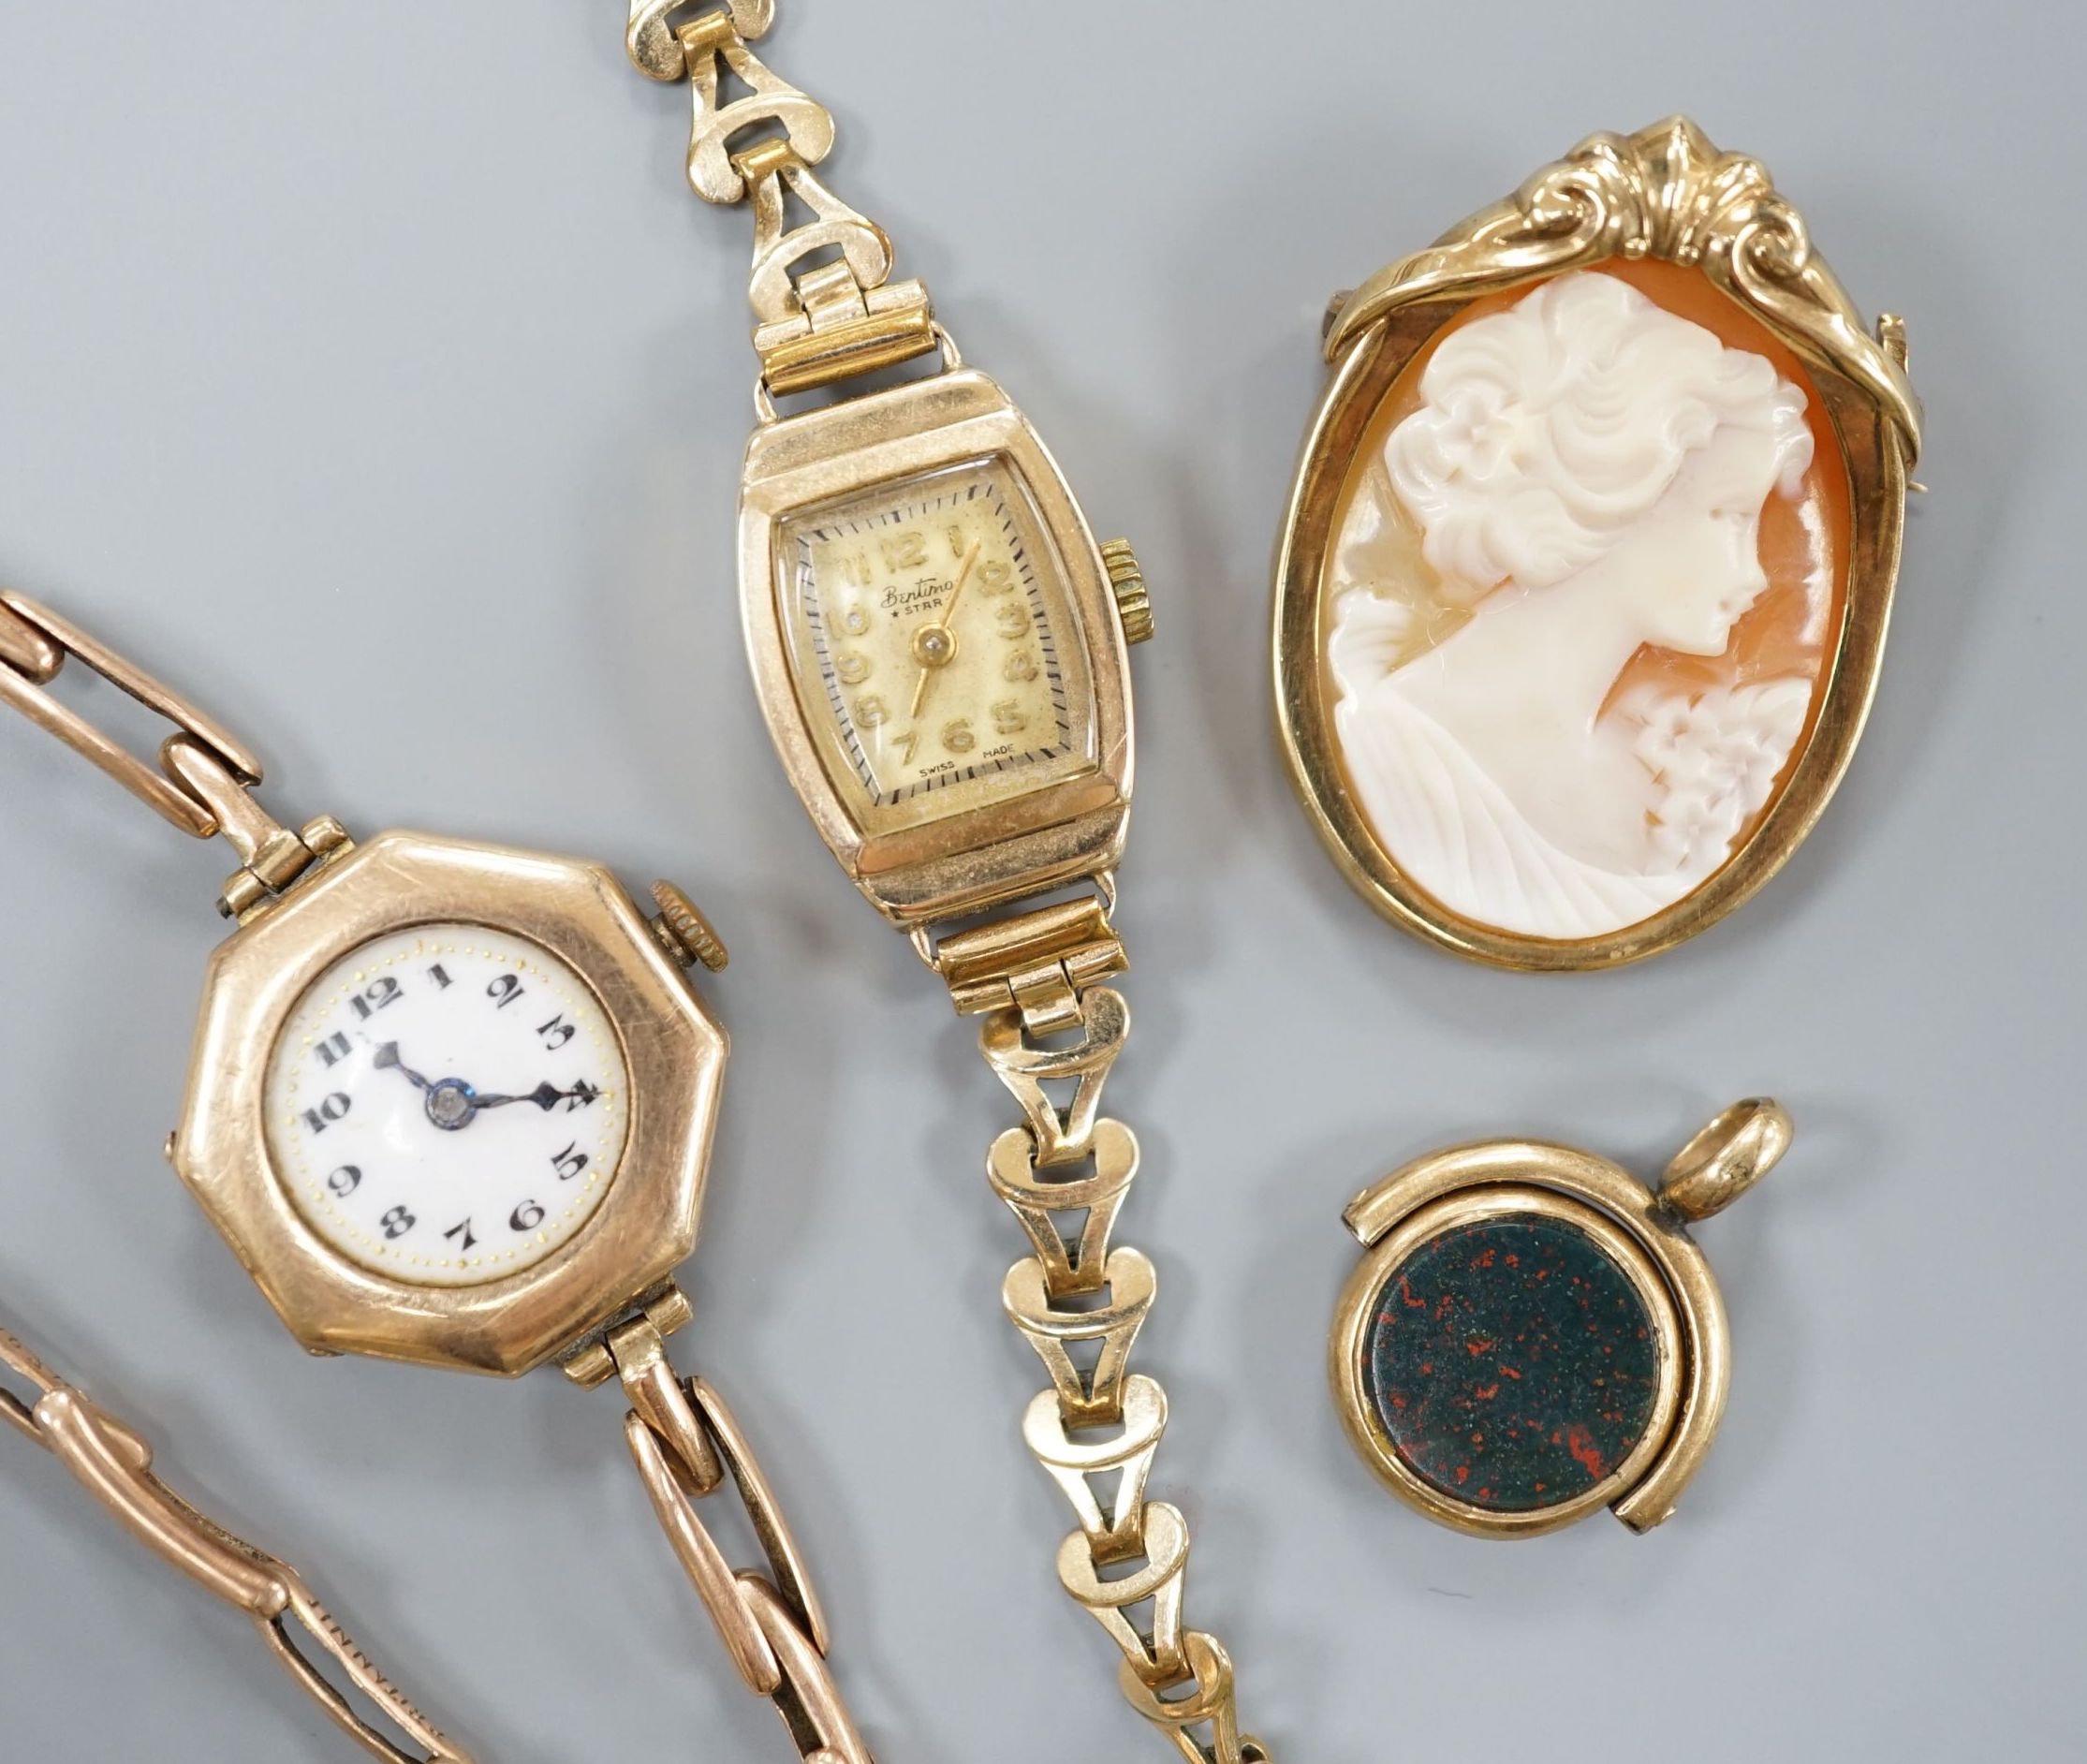 A lady's 9ct gold manual wind wrist watch, on a 9ct expanding bracelet gross 13.6 grams, one other lady's 9ct gold watch on a gold plated bracelet, a modern 9ct gold mounted oval cameo shell brooch and a carnelian and bl